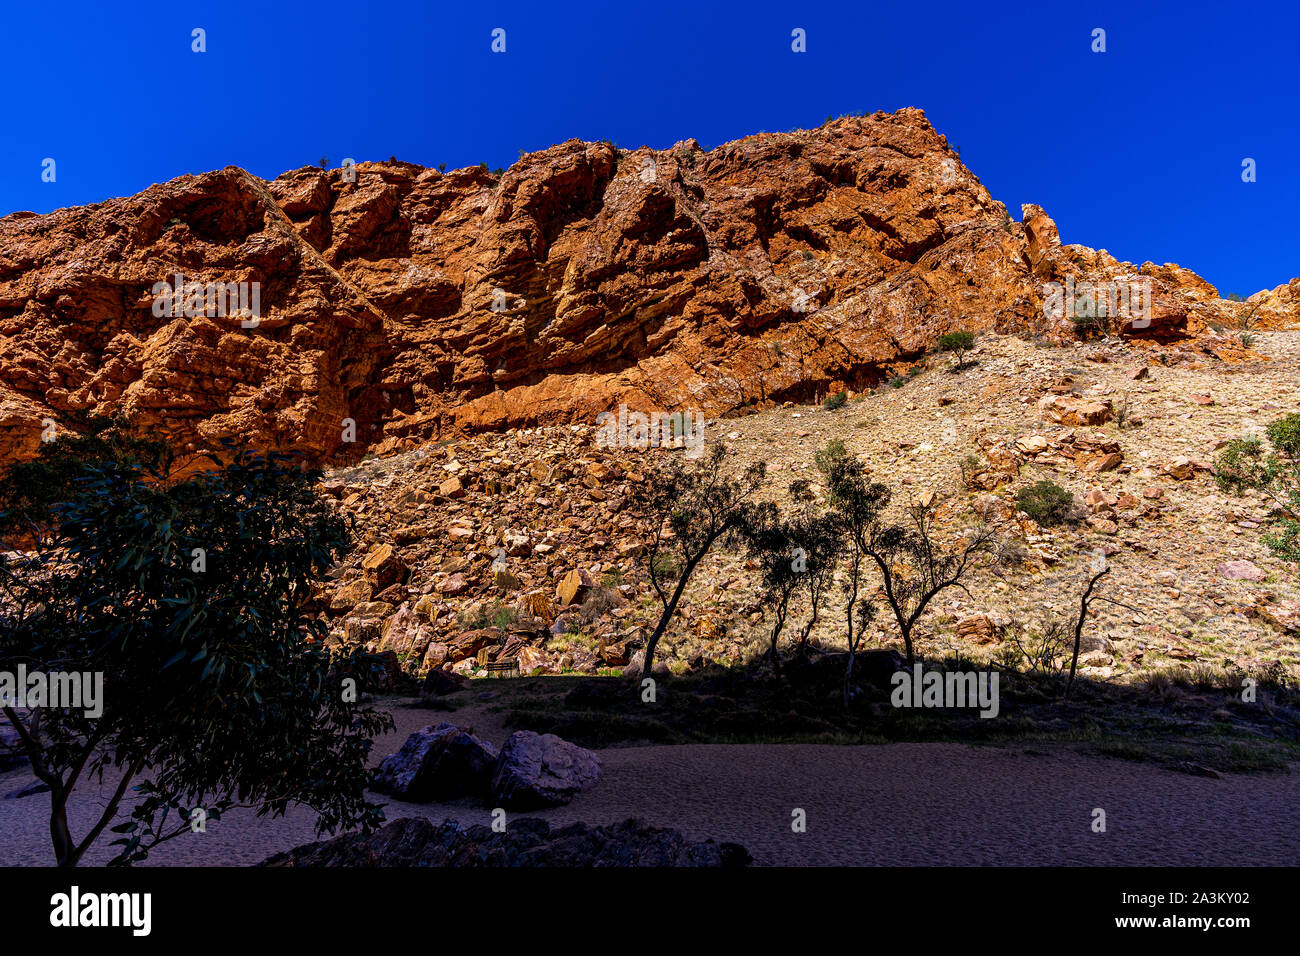 The walking track and dry riverbed that leads to Simpsons Gap in the Northern Territory, Australia. Stock Photo